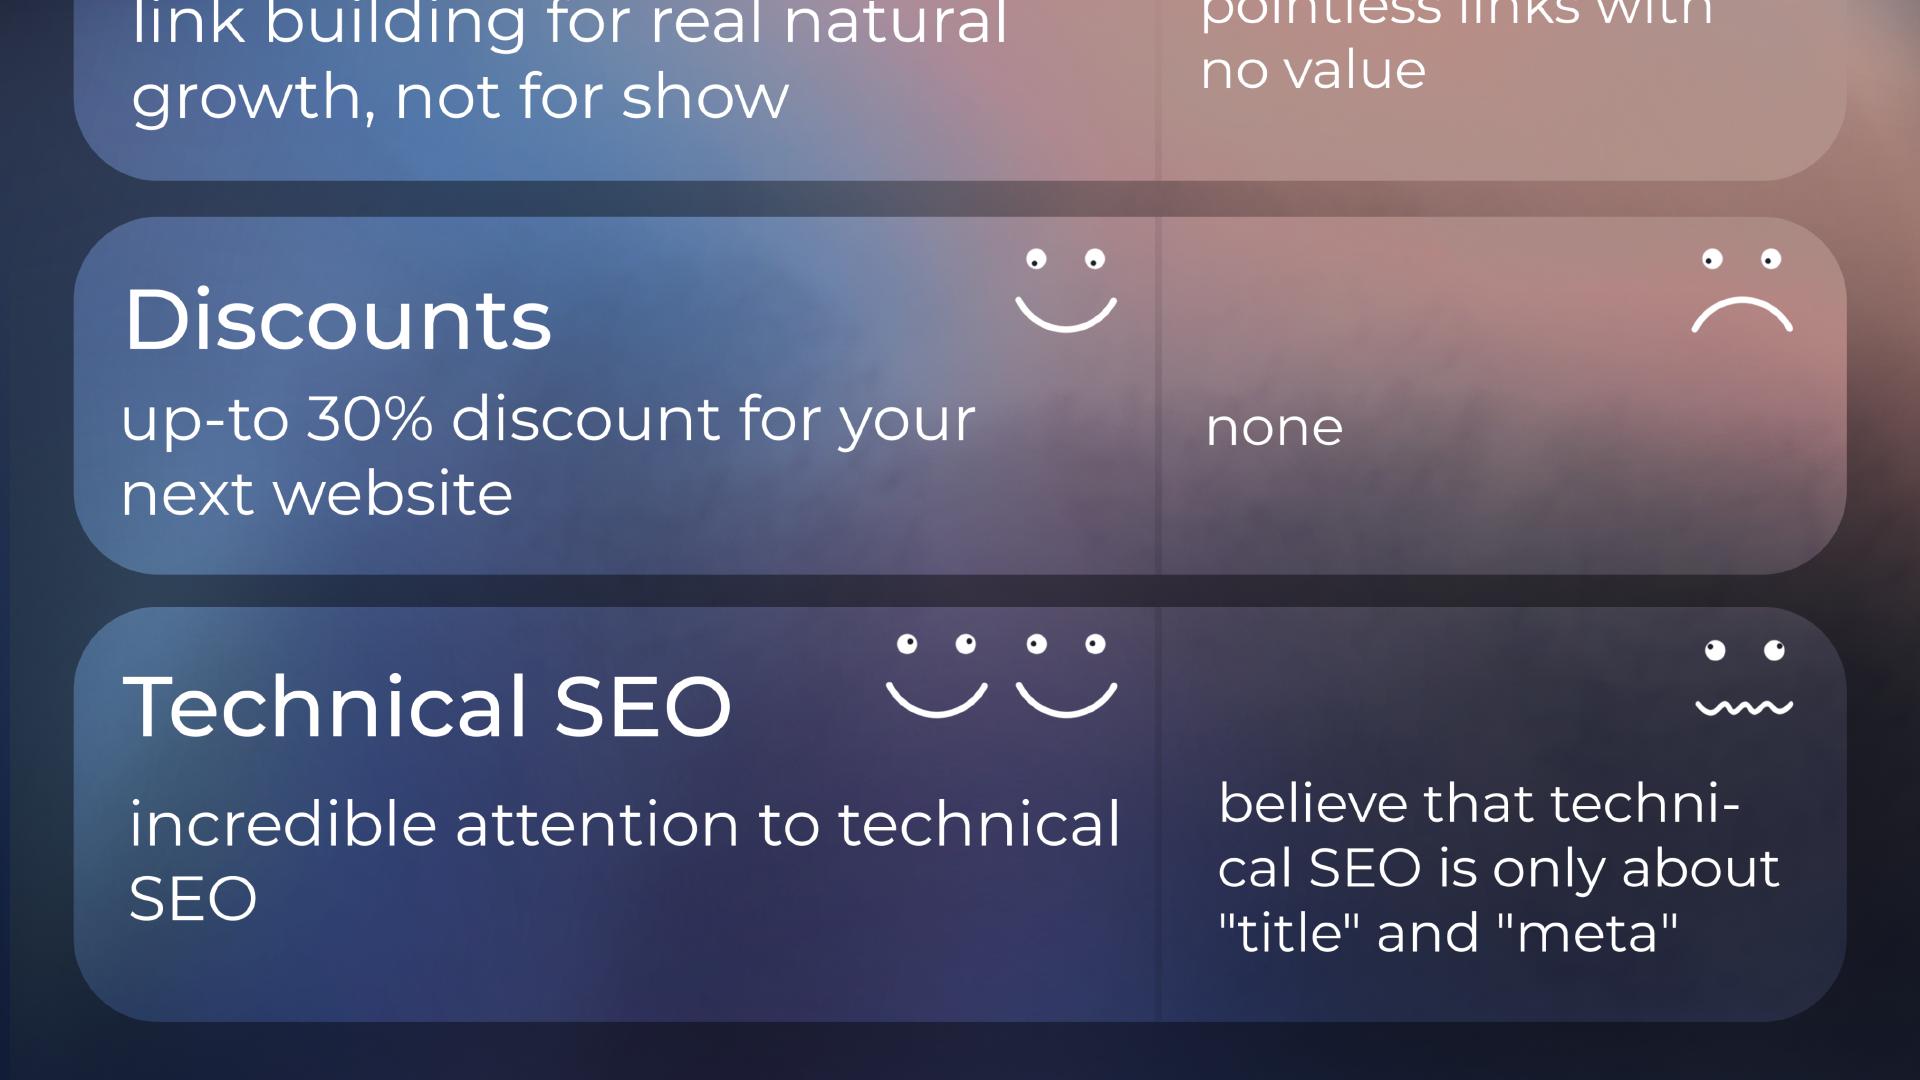 'Discounts' - InterstellarSEO: up-to 30% discount for your next website; Others: none. 'Technical SEO' - InterstellarSEO: incredible attention to technical SEO; Others: believe that technical SEO is only about 'title' and 'meta'.